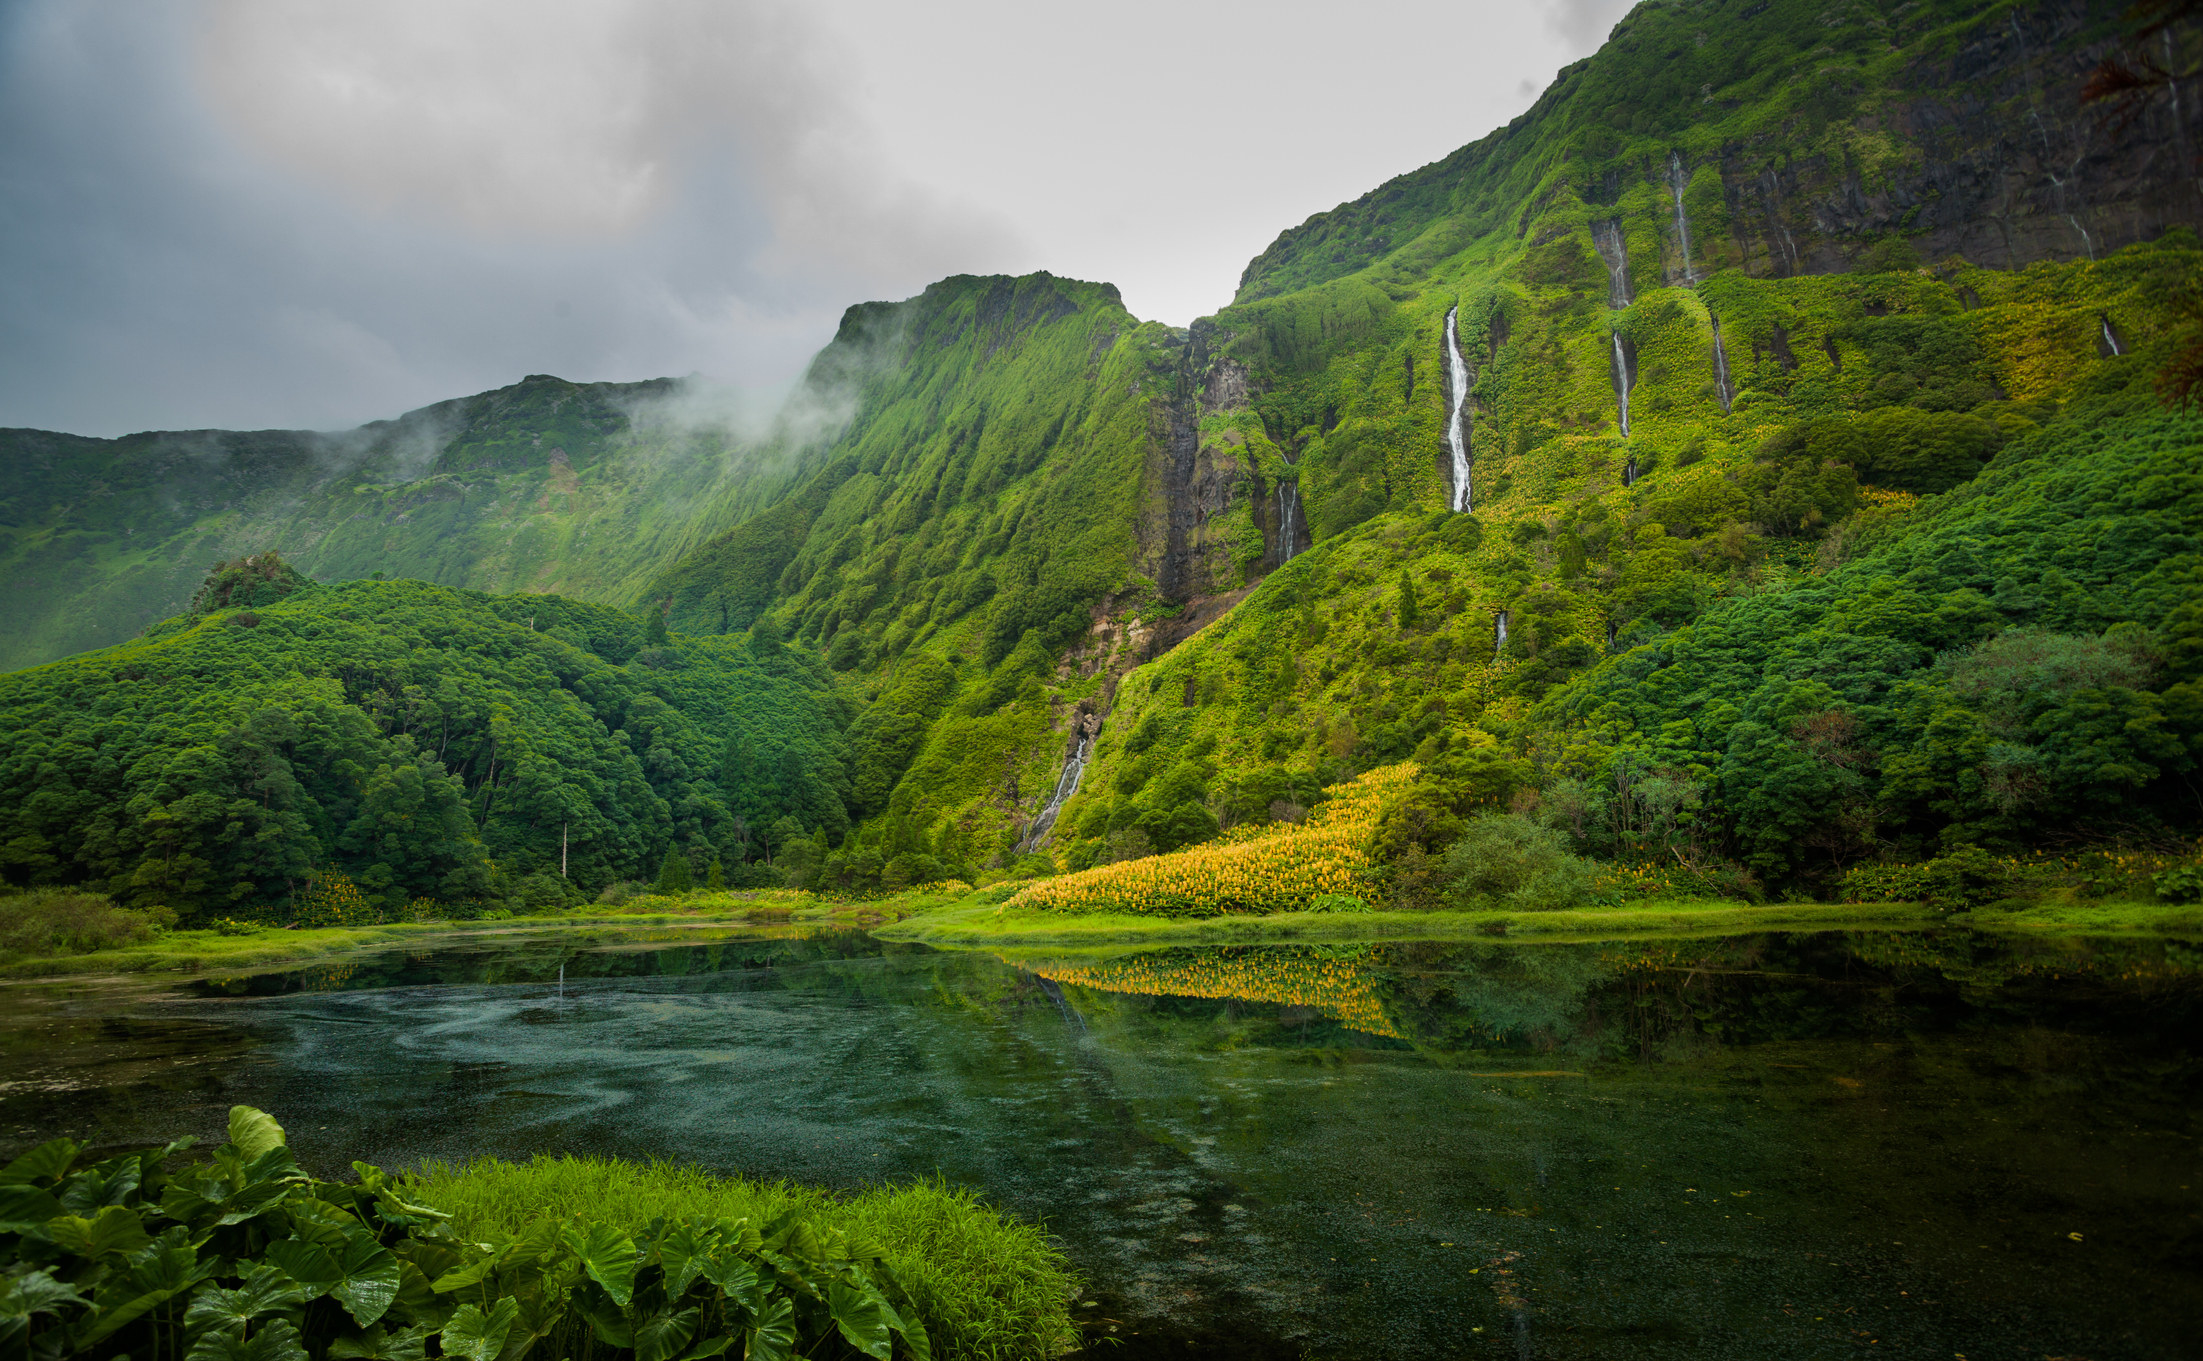 Lush forest and waterfalls in the Azores.